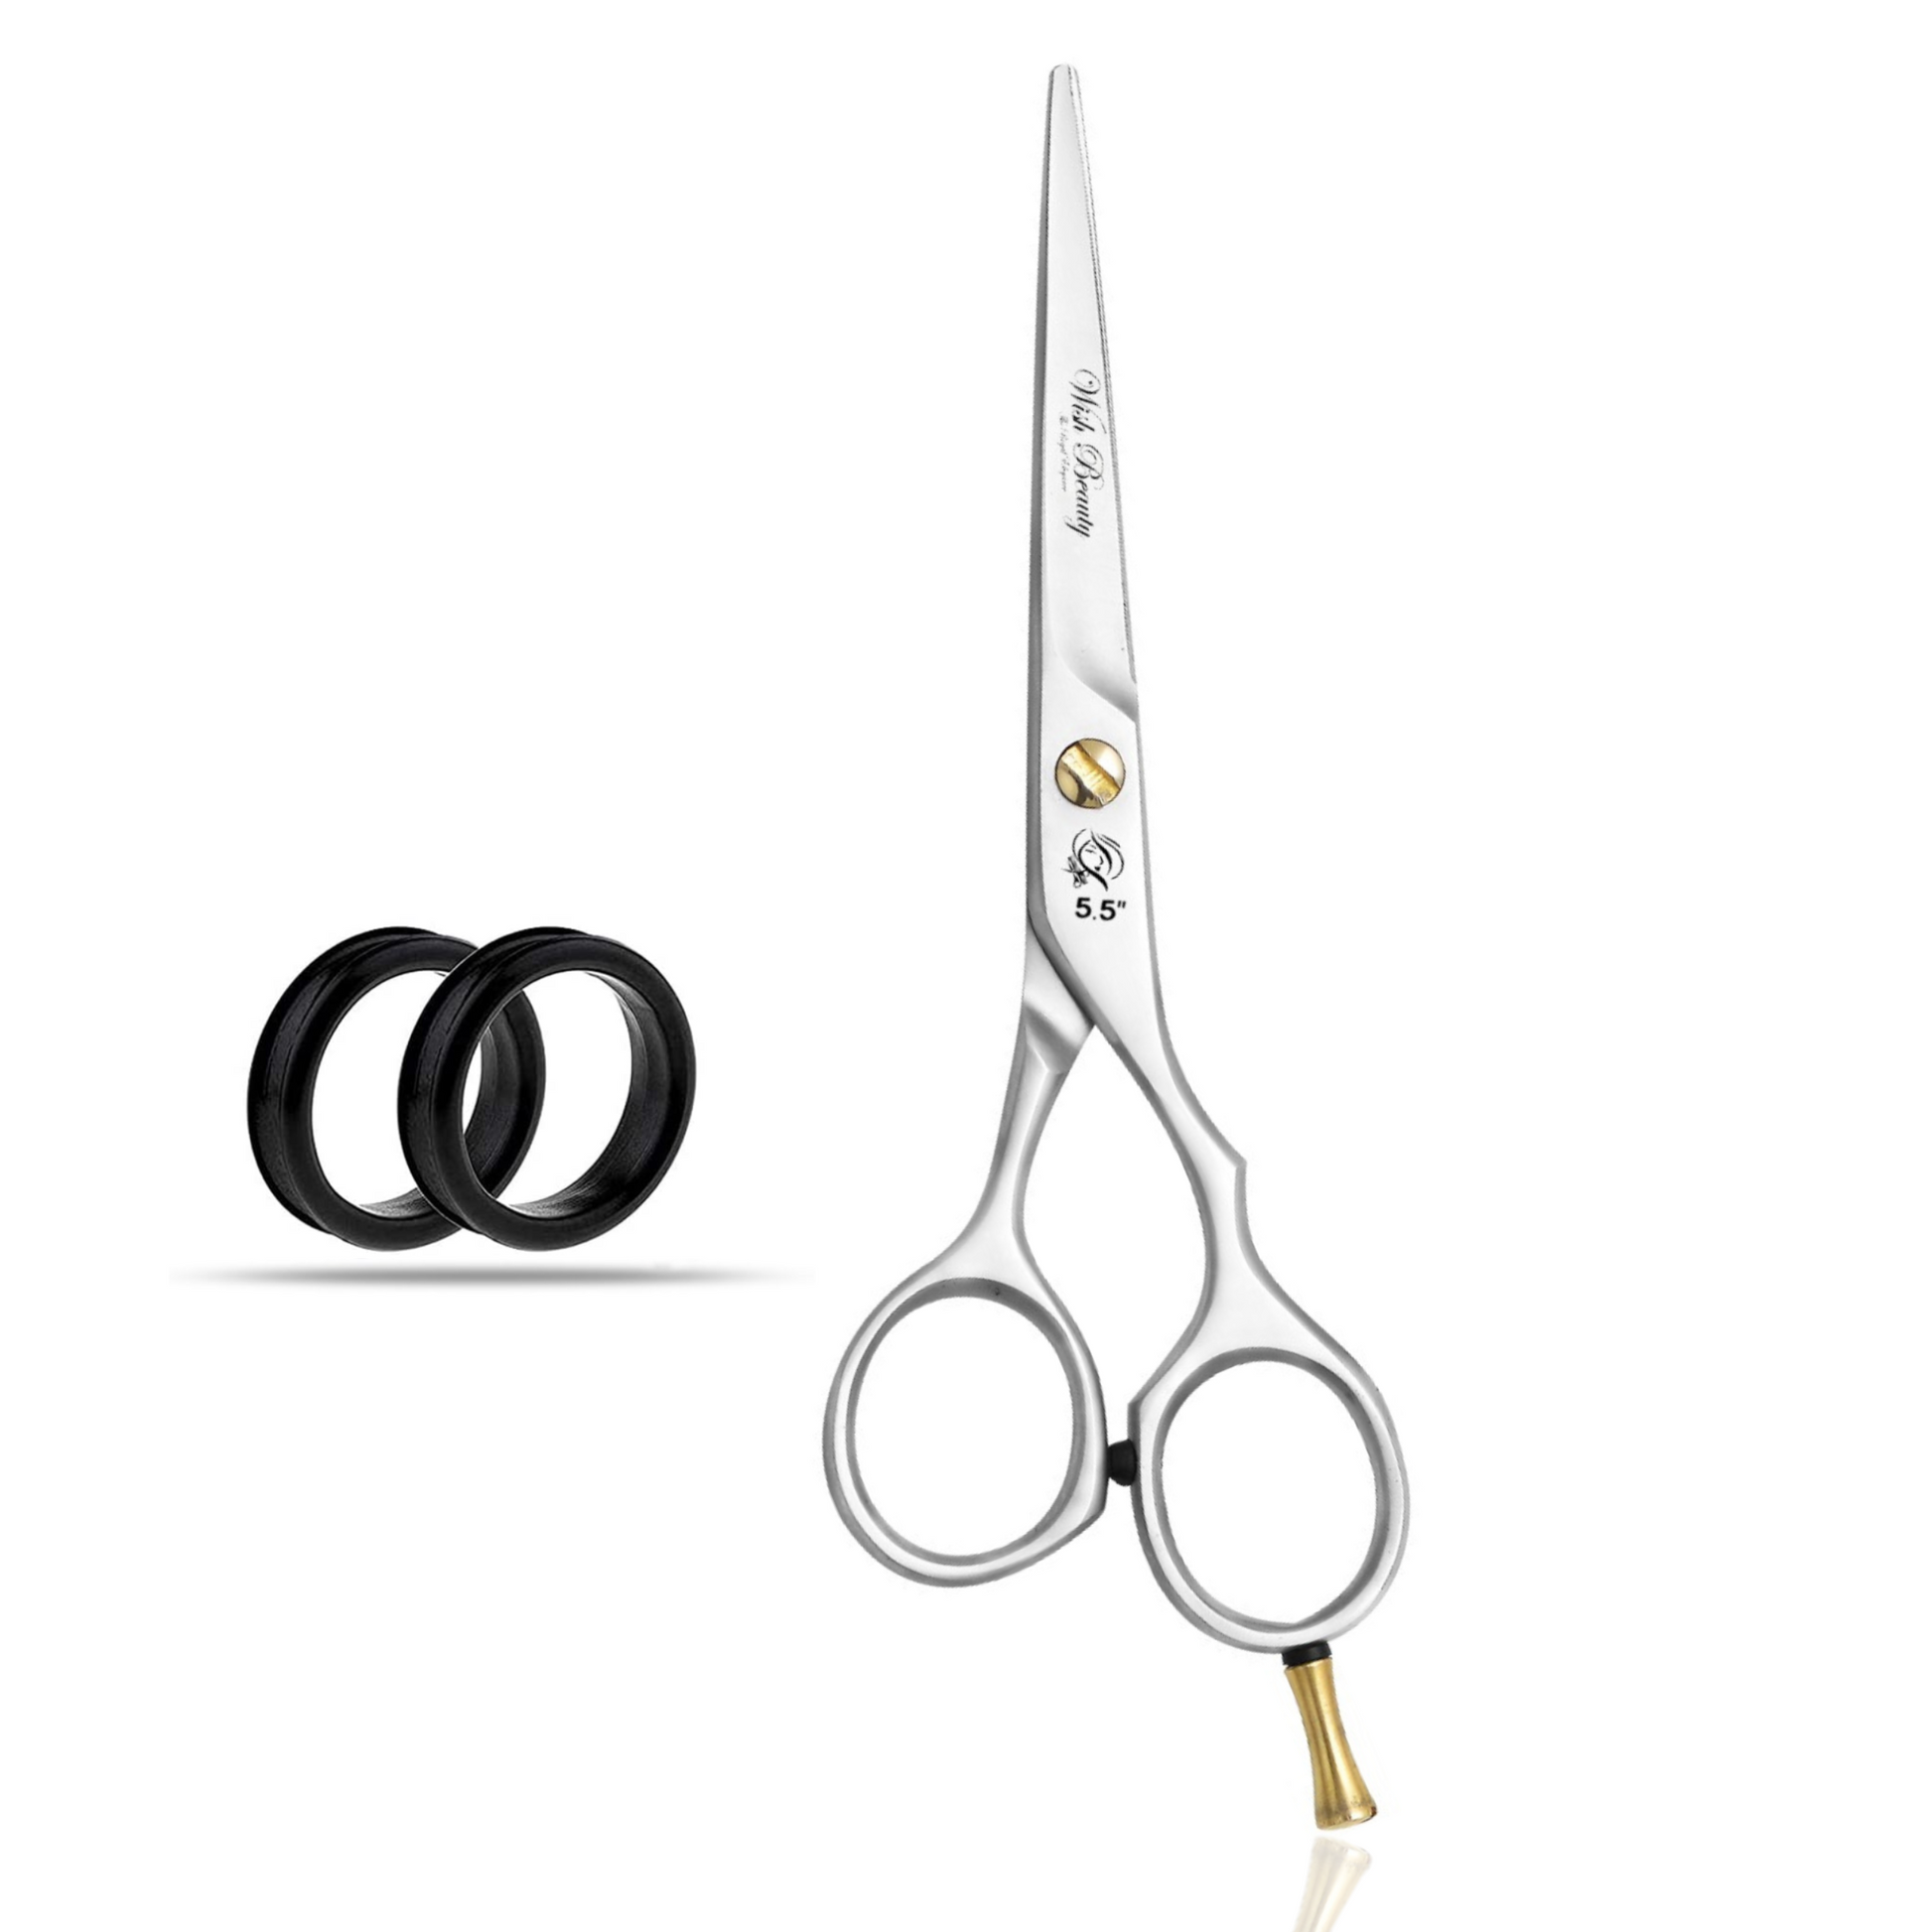 Professional Thinning Shears 6 inch with Extremely Sharp Blades, 440C Steel